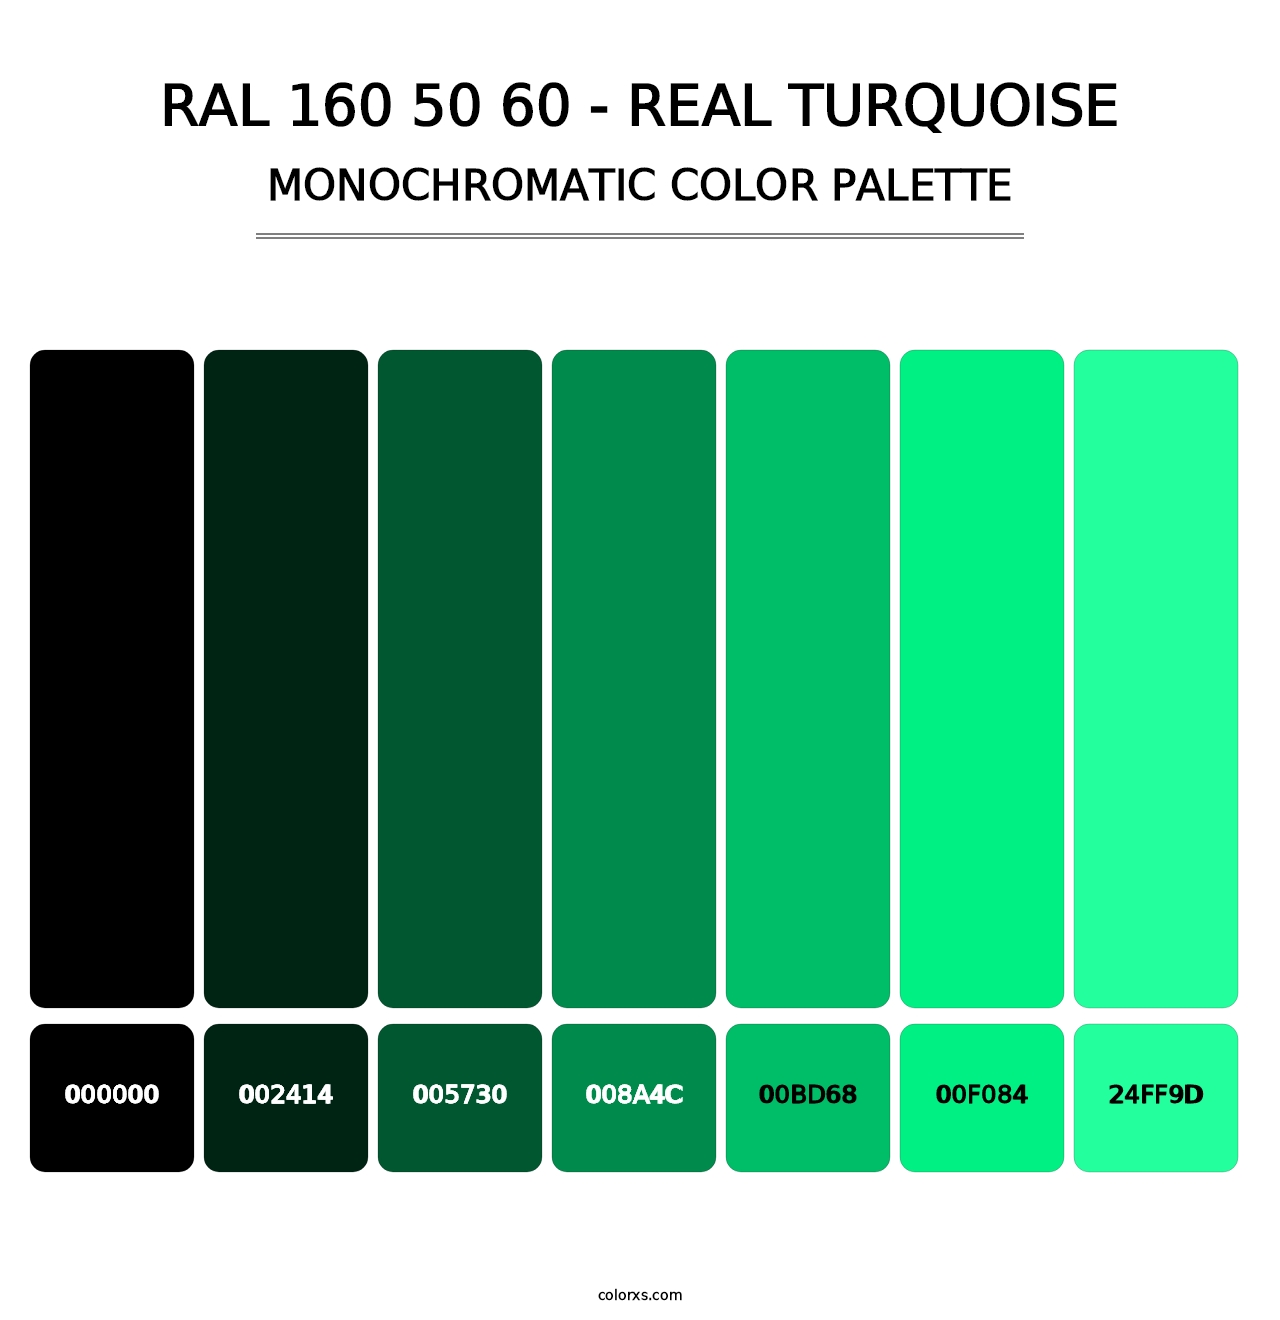 RAL 160 50 60 - Real Turquoise - Monochromatic Color Palette